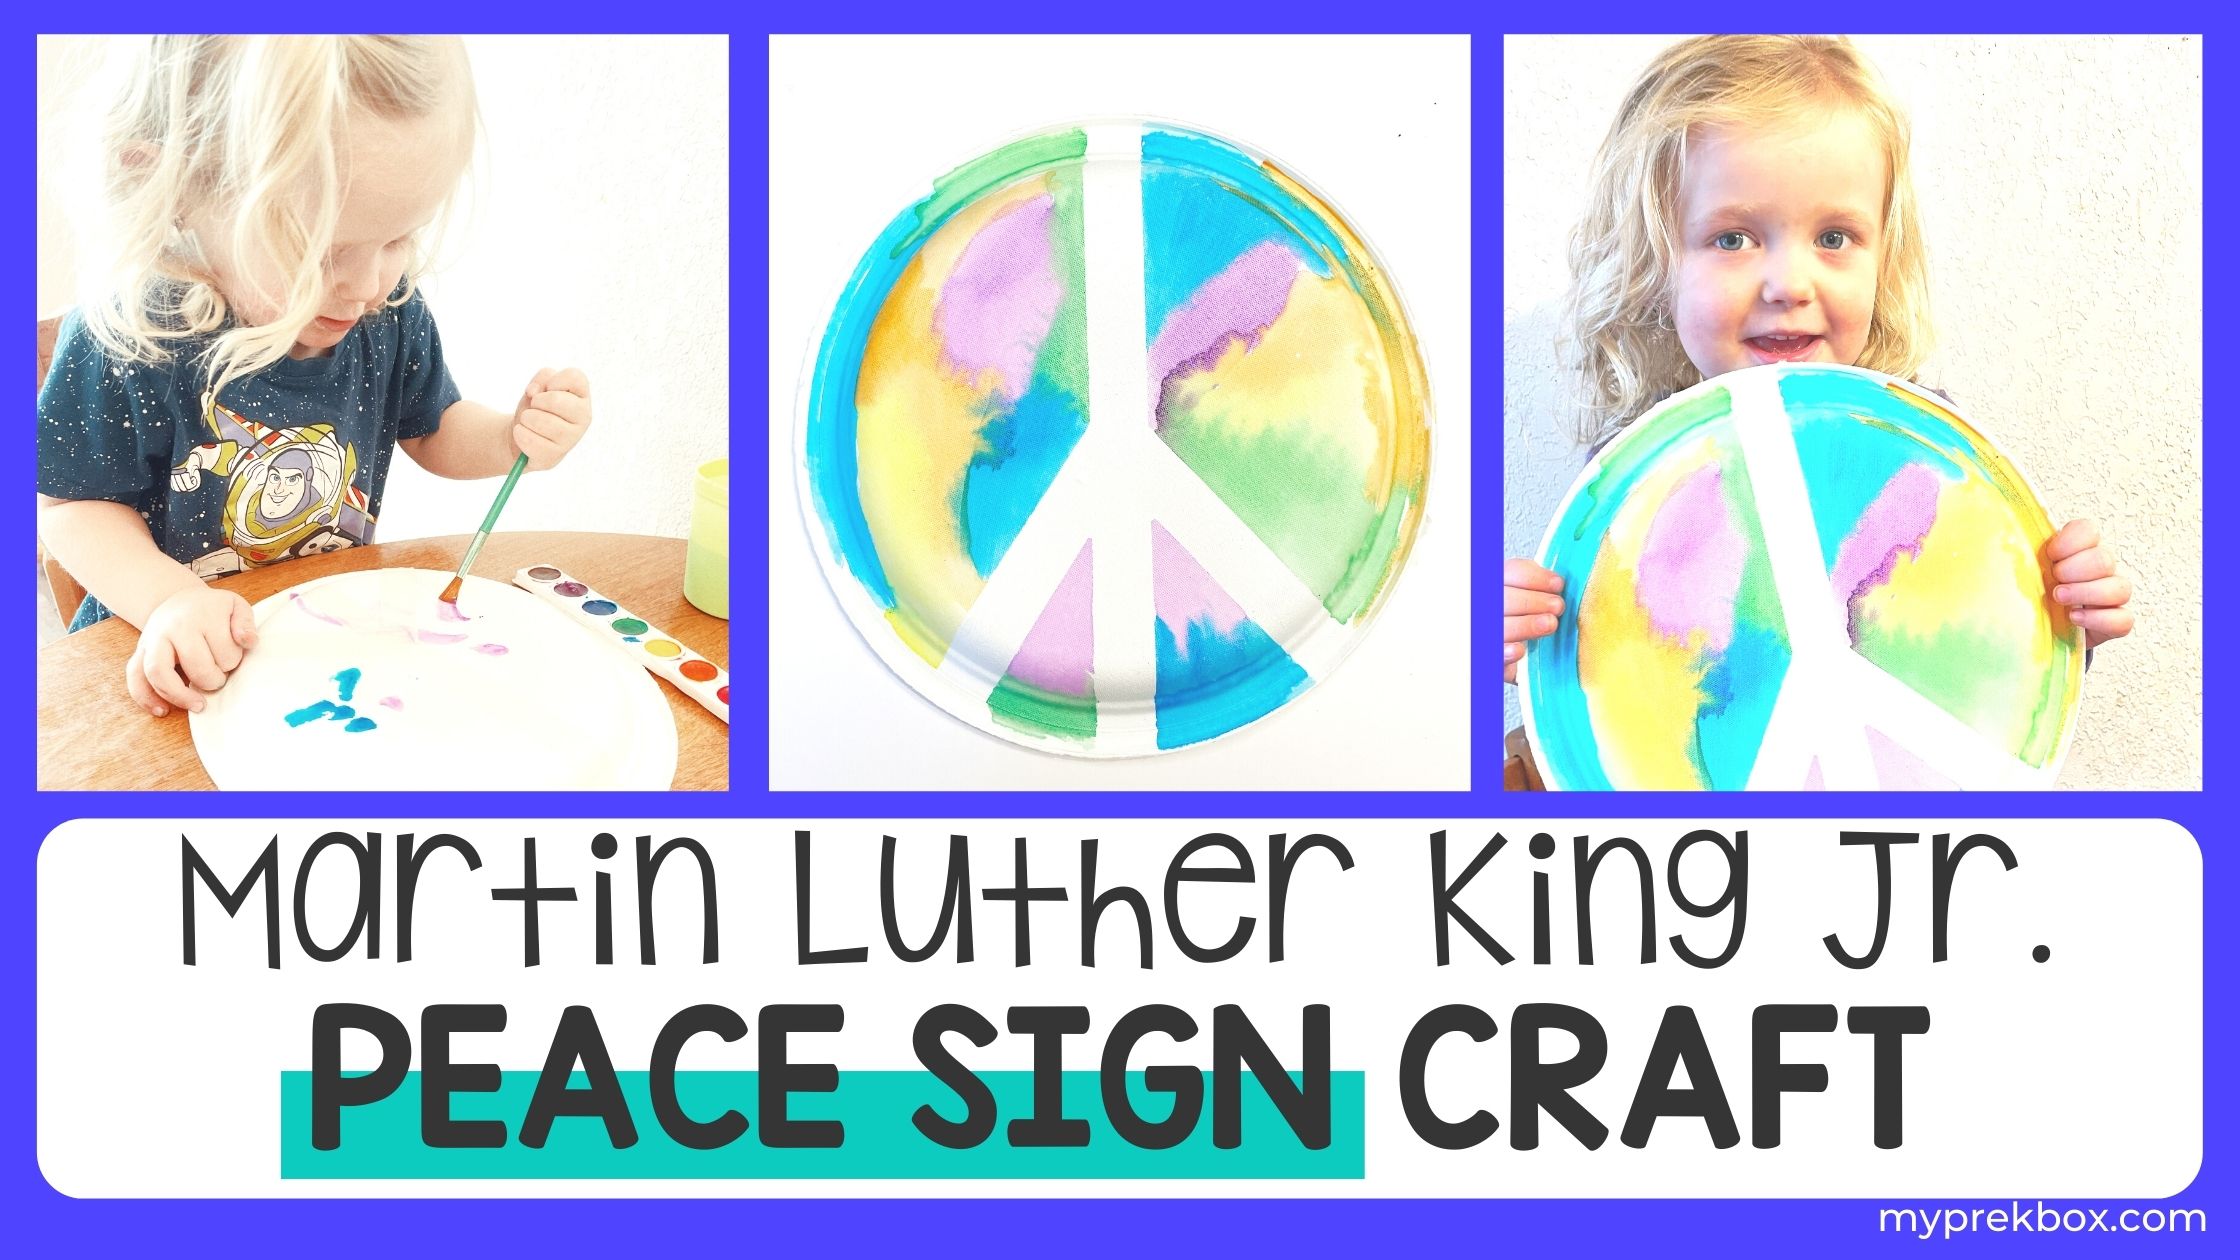 Martin Luther King Jr. Peace Sign Craft